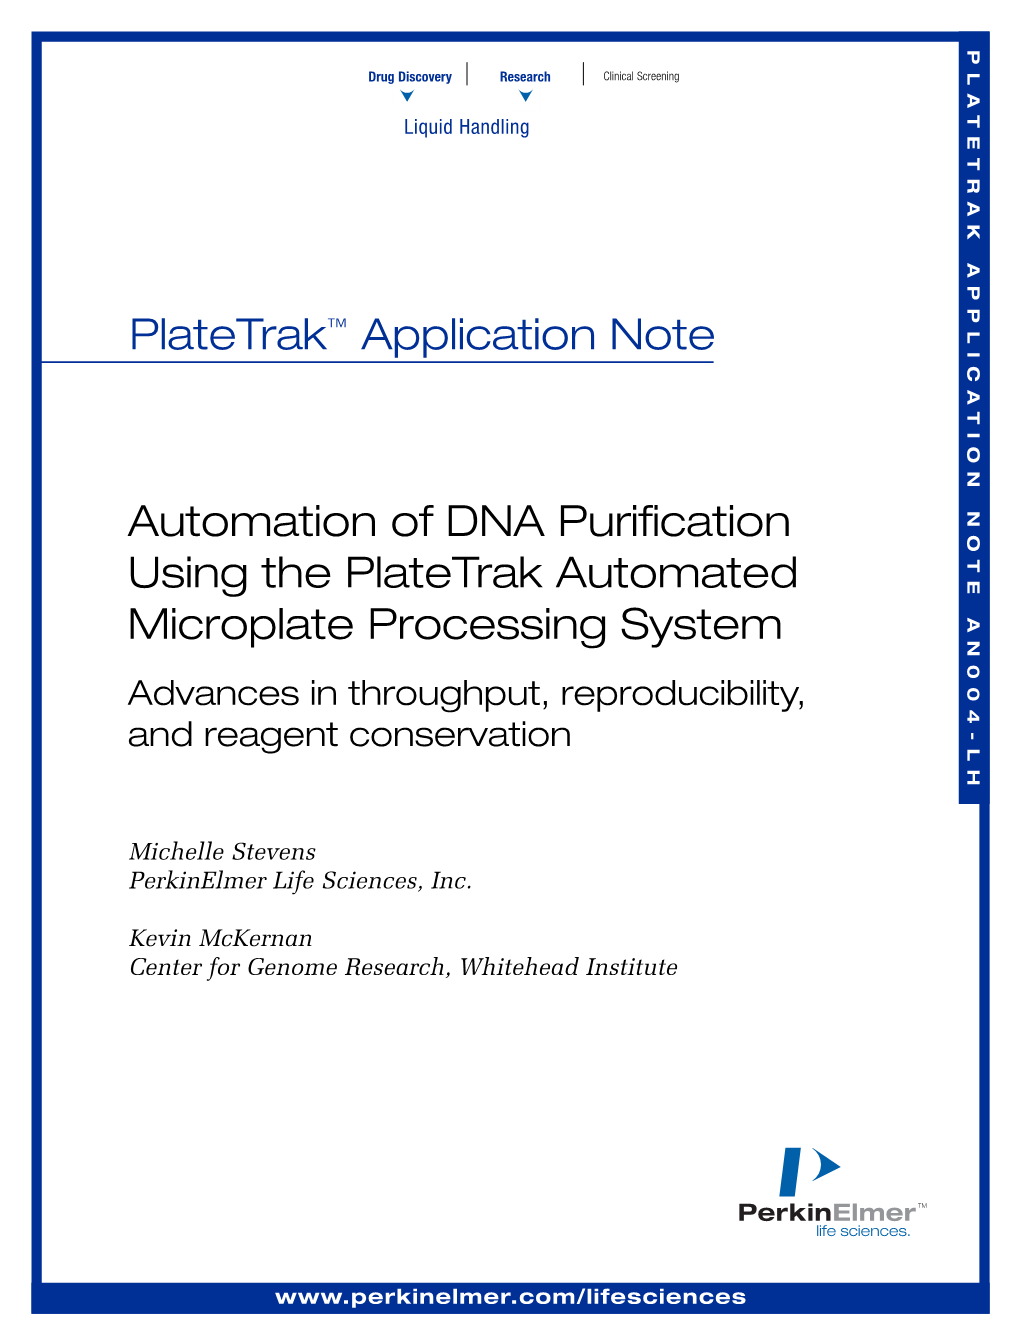 Automation of DNA Purification Using the Platetrak Automated Microplate Processing System Advances in Throughput, Reproducibility, and Reagent Conservation